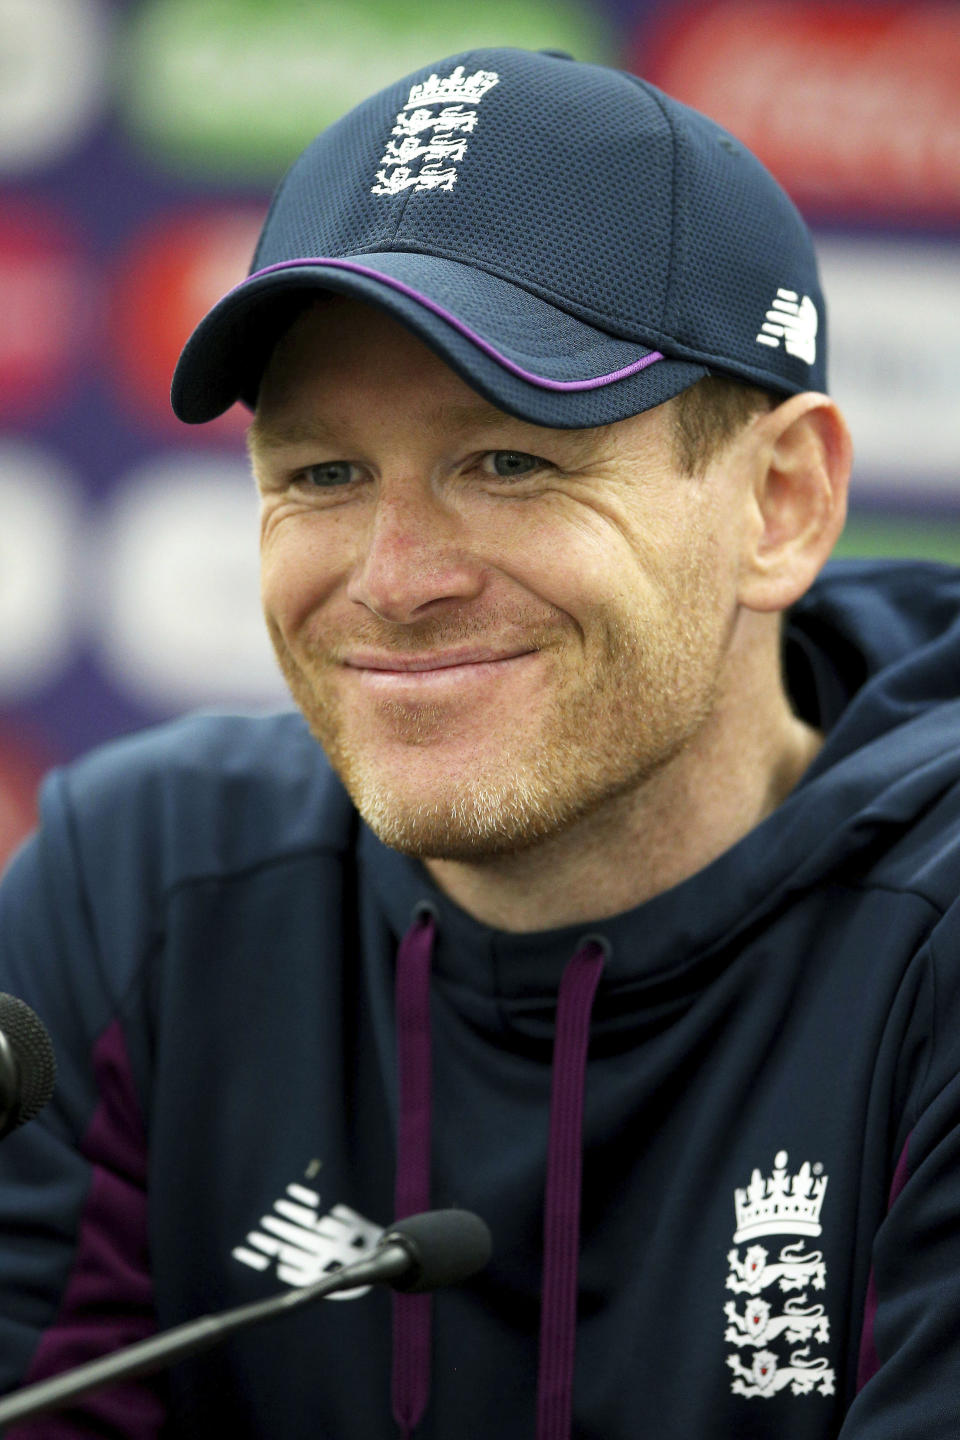 England's Eoin Morgan speaks during a press conference at The Oval, London, Wednesday May 29, 2019 on the eve of the opening match of the Cricket World Cup. (Nigel French/PA via AP)